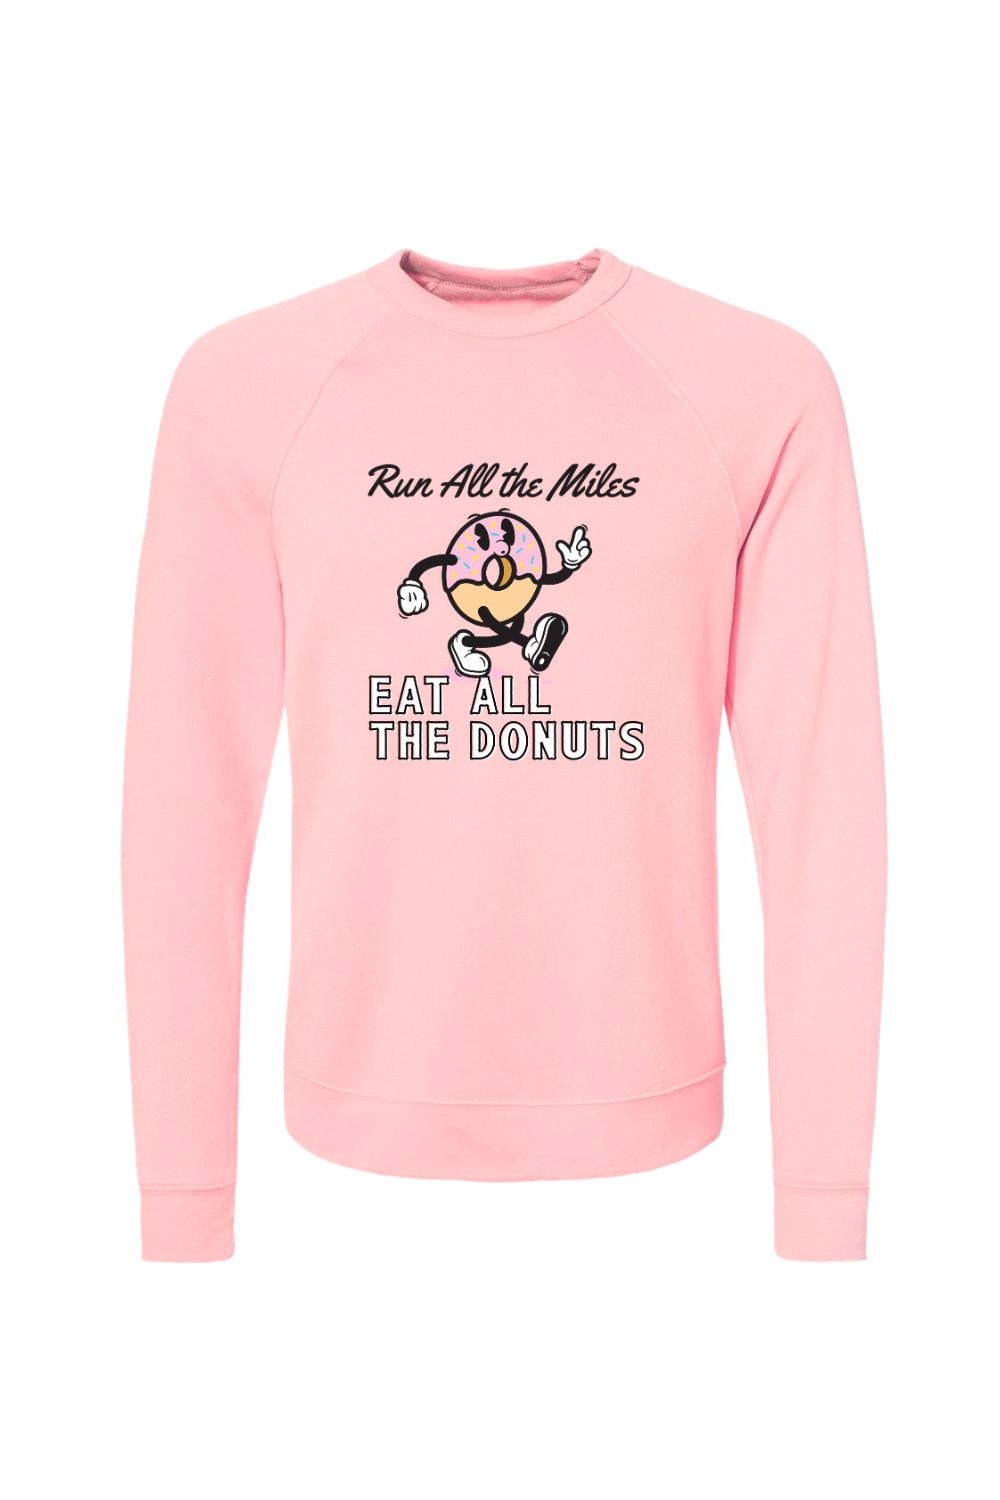 Run All The Miles, Eat All The Donuts Sweatshirt